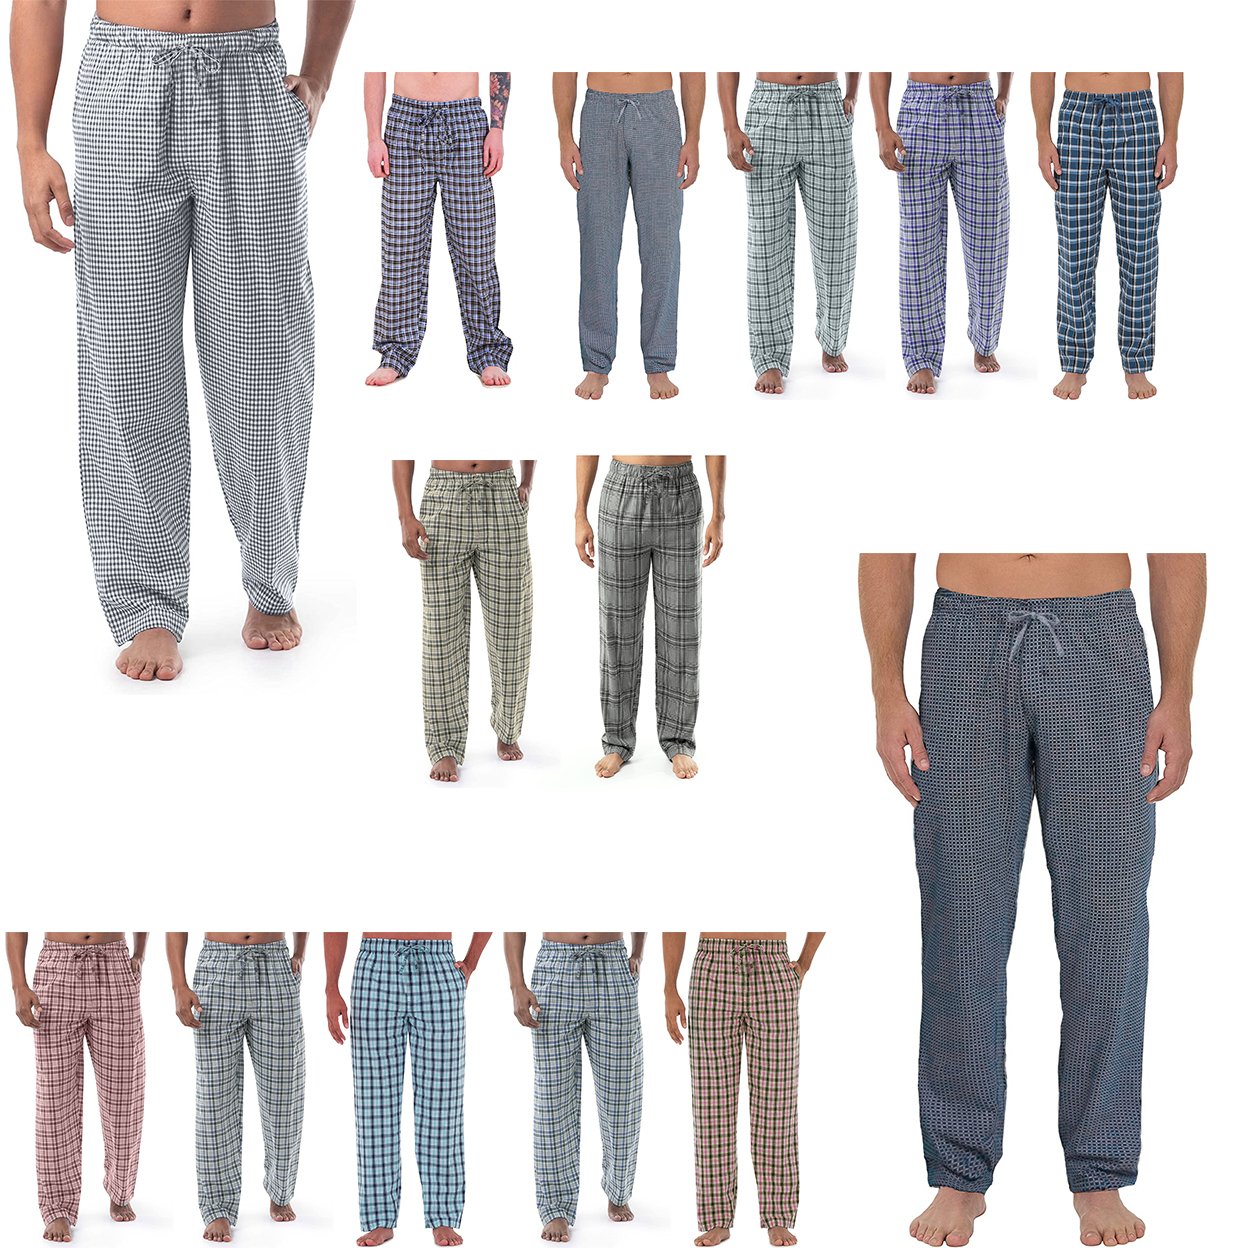 3-Pack: Men's Soft Jersey Knit Long Lounge Sleep Pants With Pockets - Plaid, Small